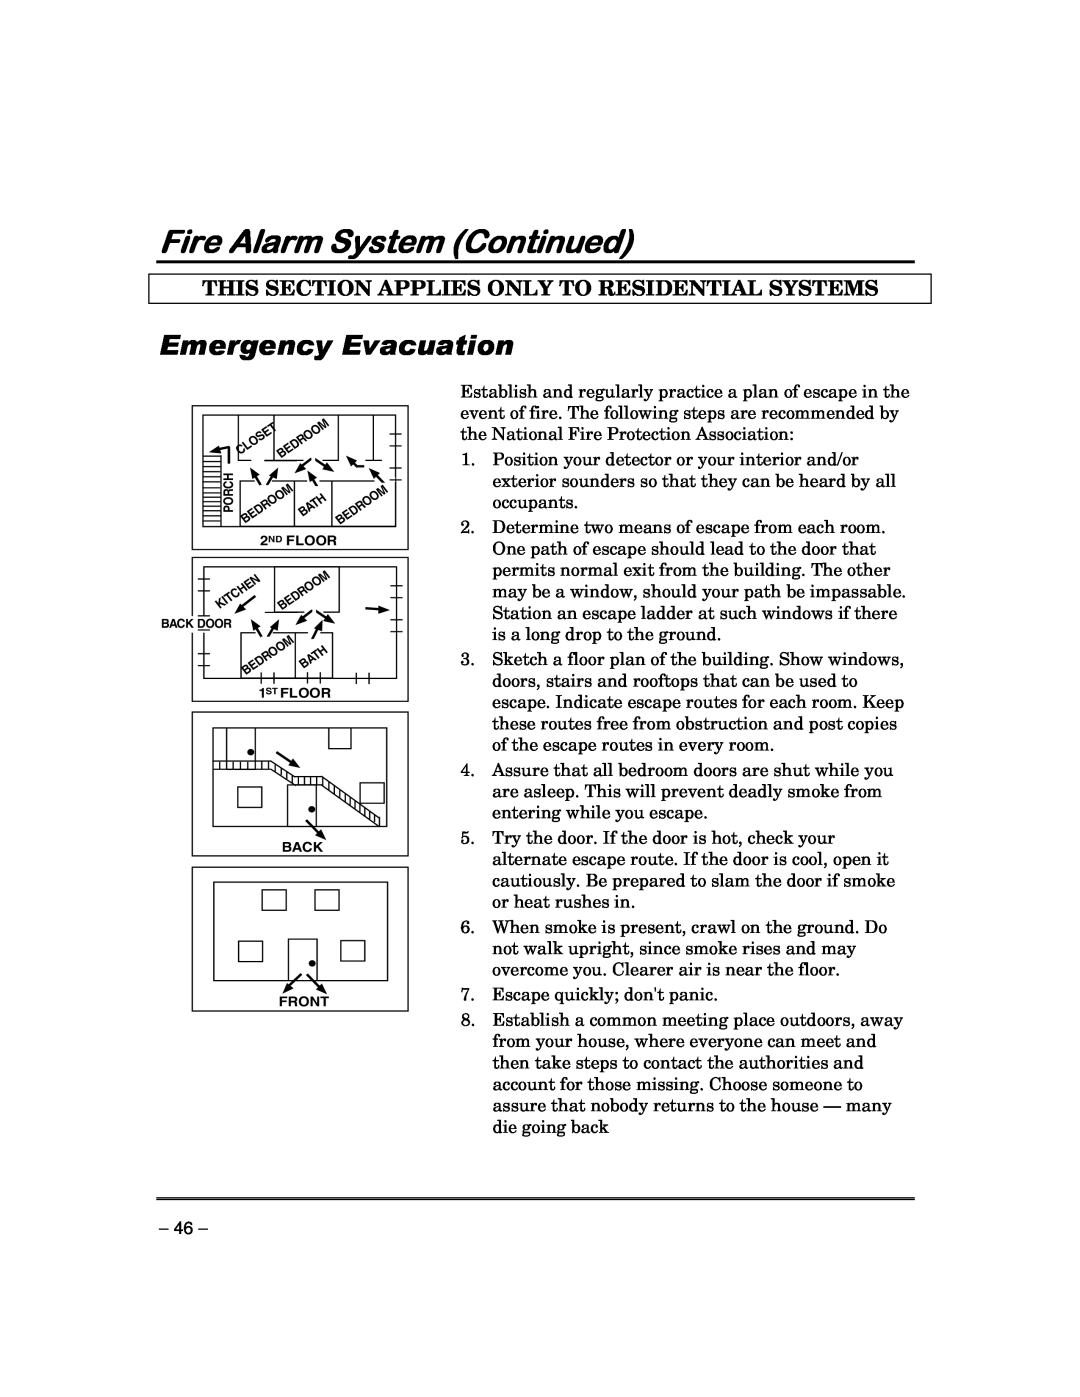 First Alert FA148CPSIA Emergency Evacuation, Fire Alarm System Continued, This Section Applies Only To Residential Systems 